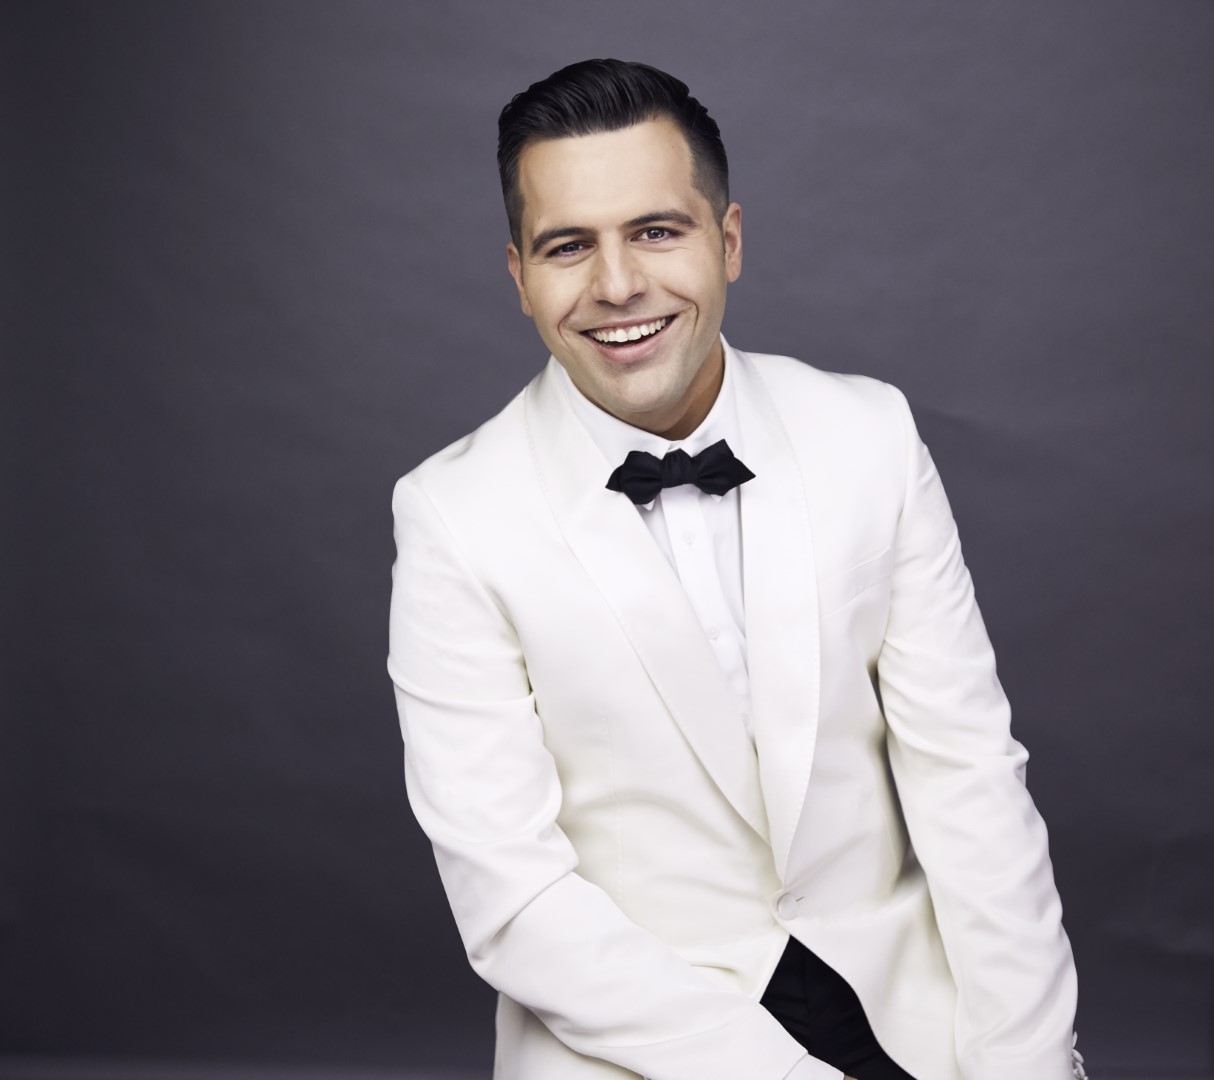 Eurovision Australia Decides 2019: It’s only the beginning for Mark Vincent